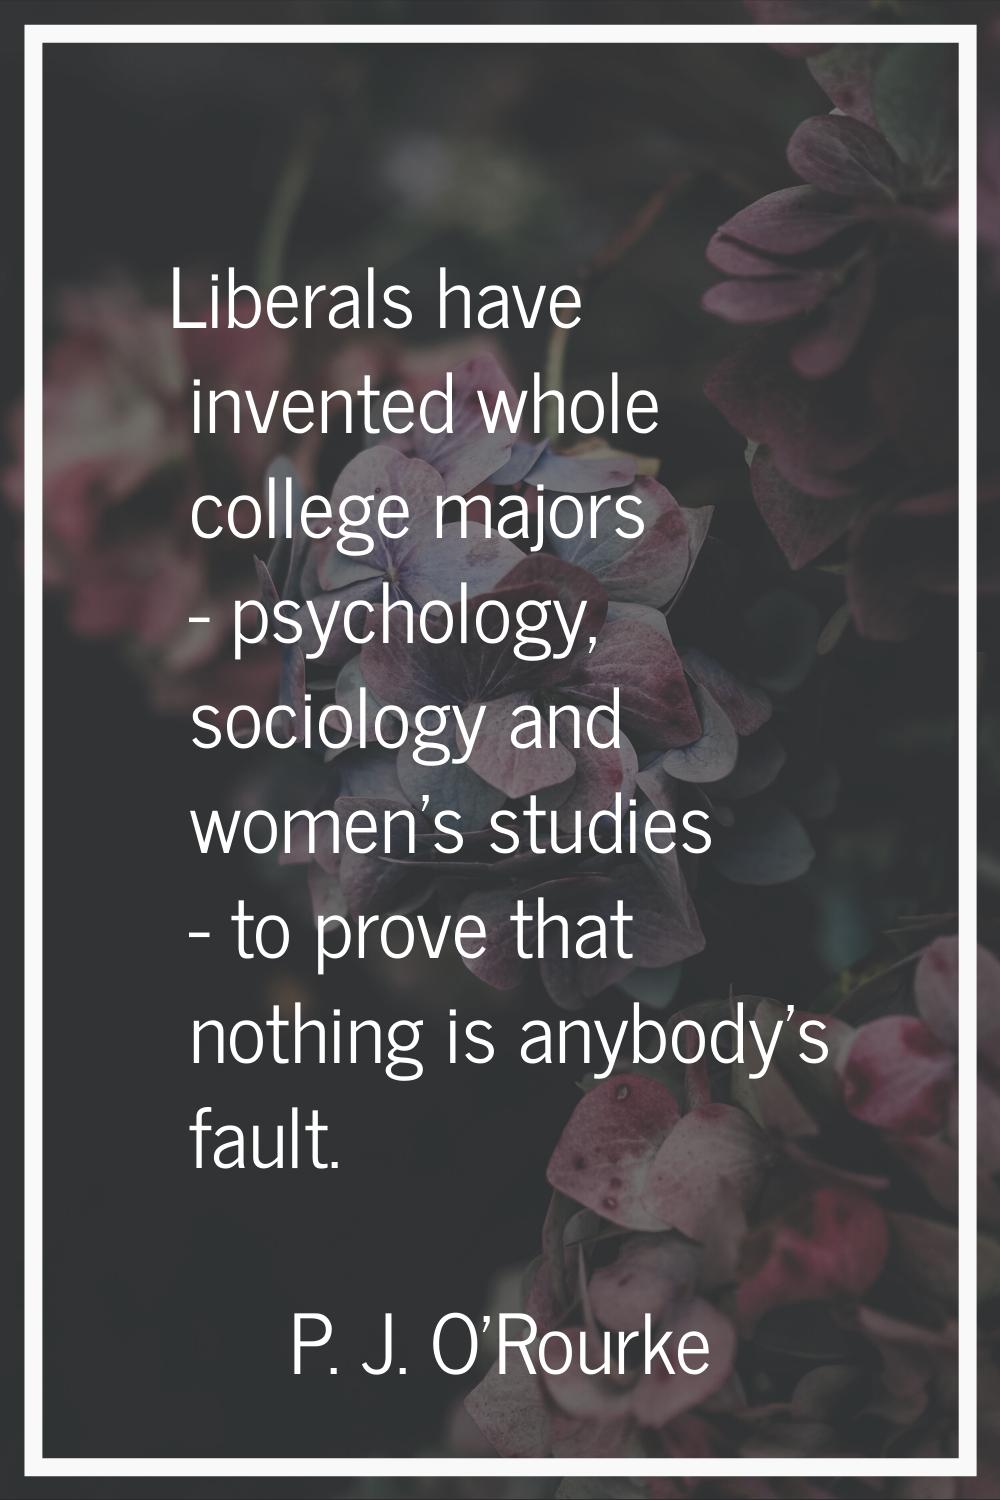 Liberals have invented whole college majors - psychology, sociology and women's studies - to prove 